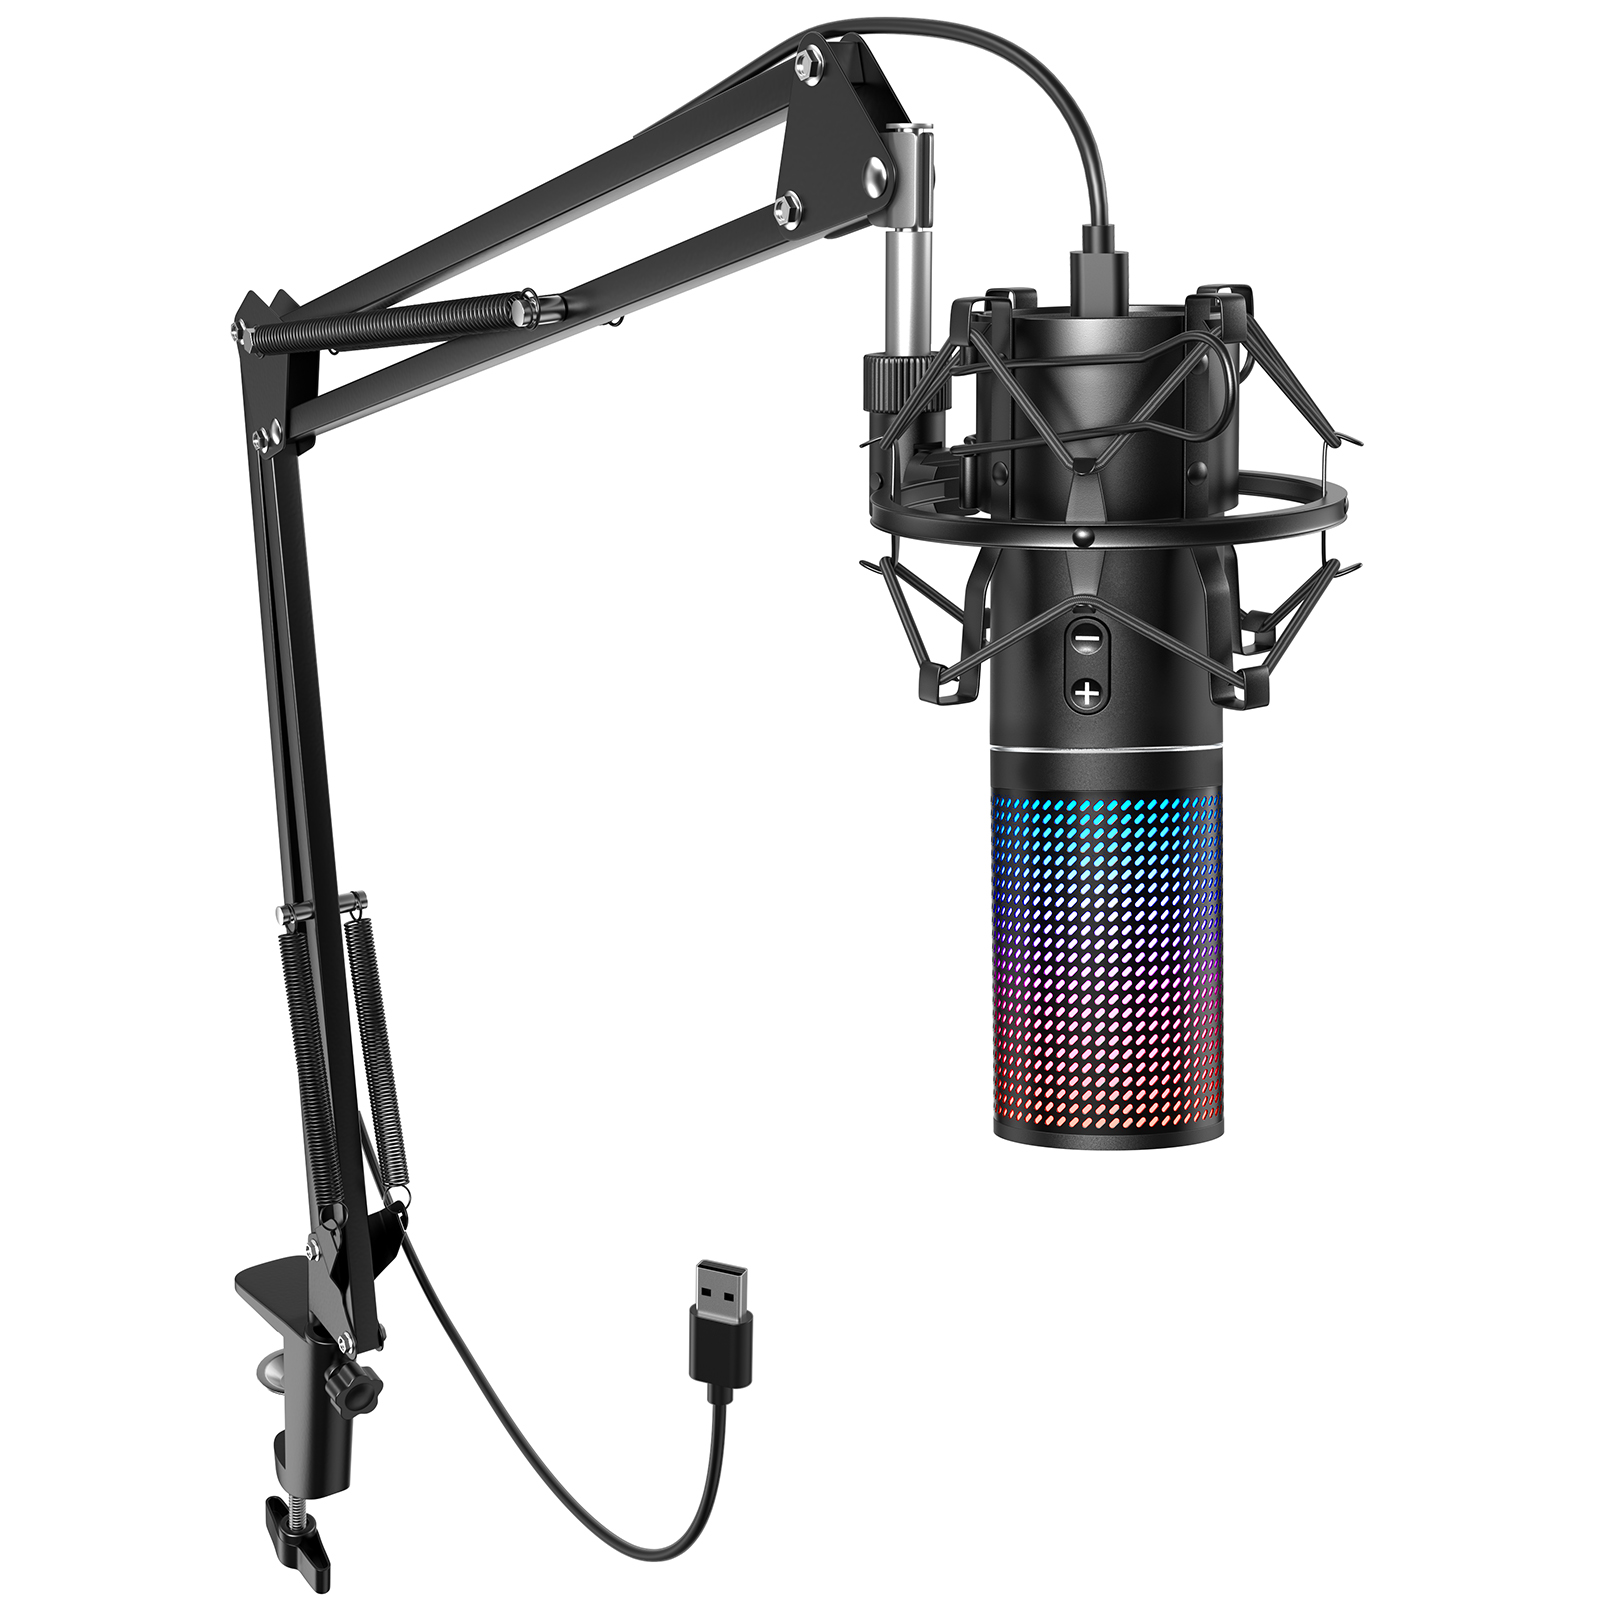 

Rgb , Usb Pc Microphone With Adjustable Boom Arm, Quick Mute Button For Streaming, Podcasting, Recording, Singing, Condenser Cardioid Microfono Kit For Ps4/5, Twitch Gamer Q9s